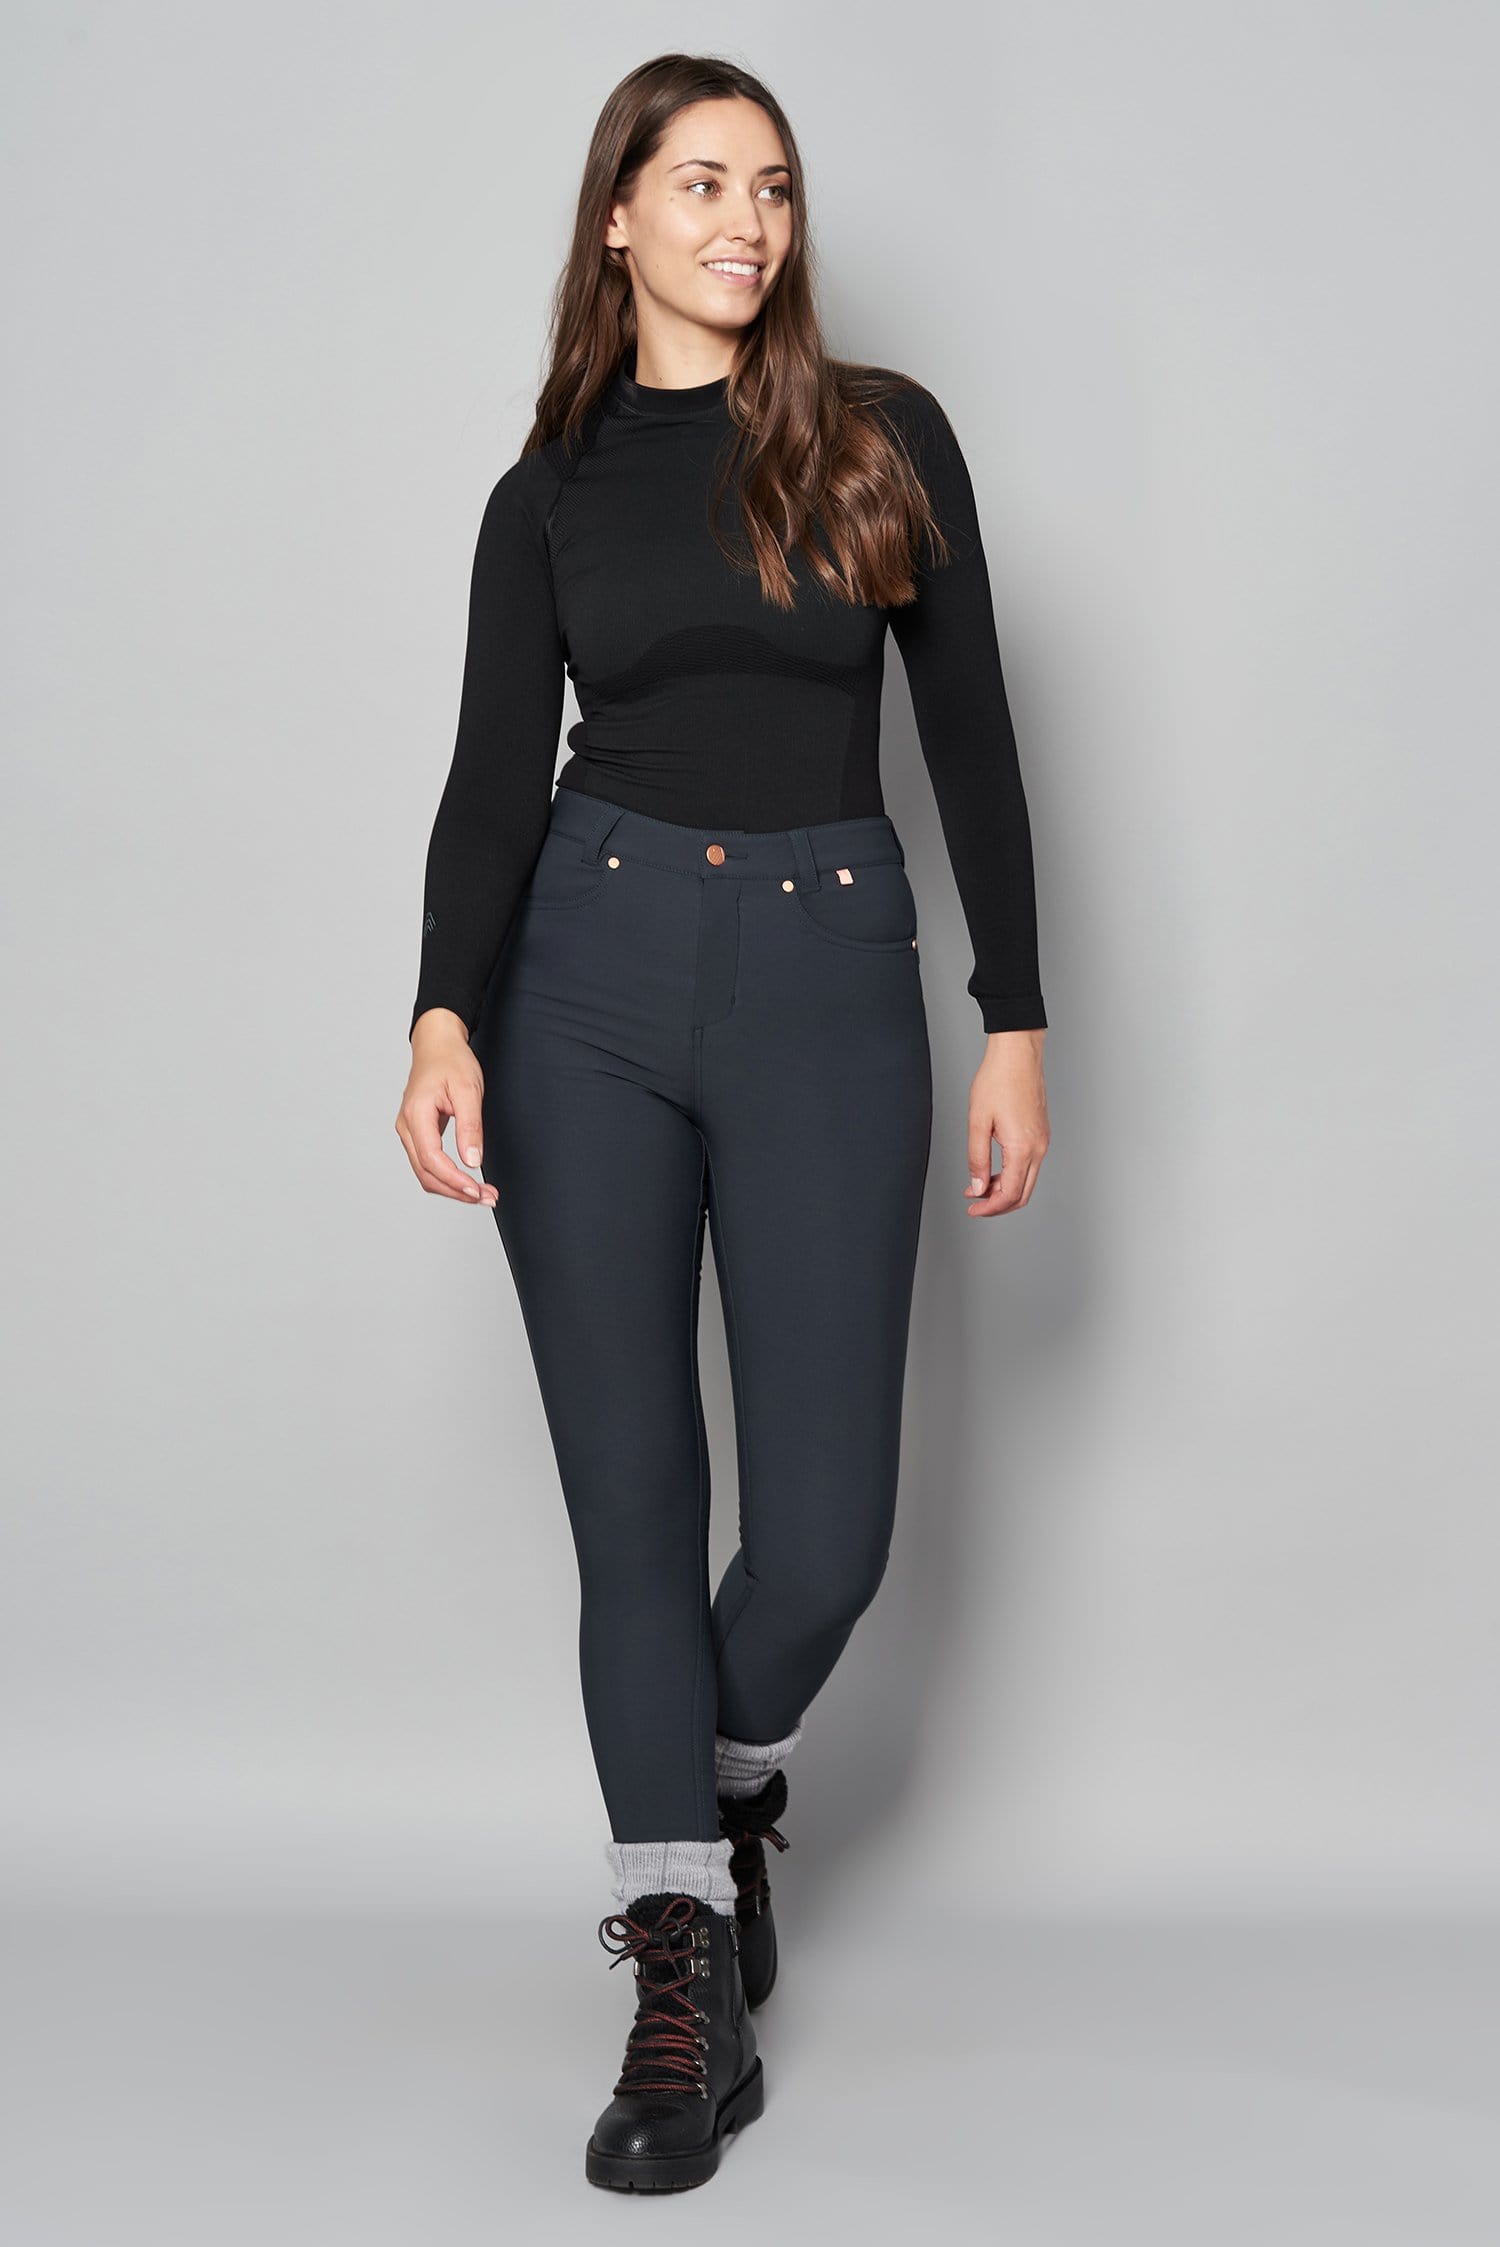 Thermal Skinny Outdoor Trousers - Graphite